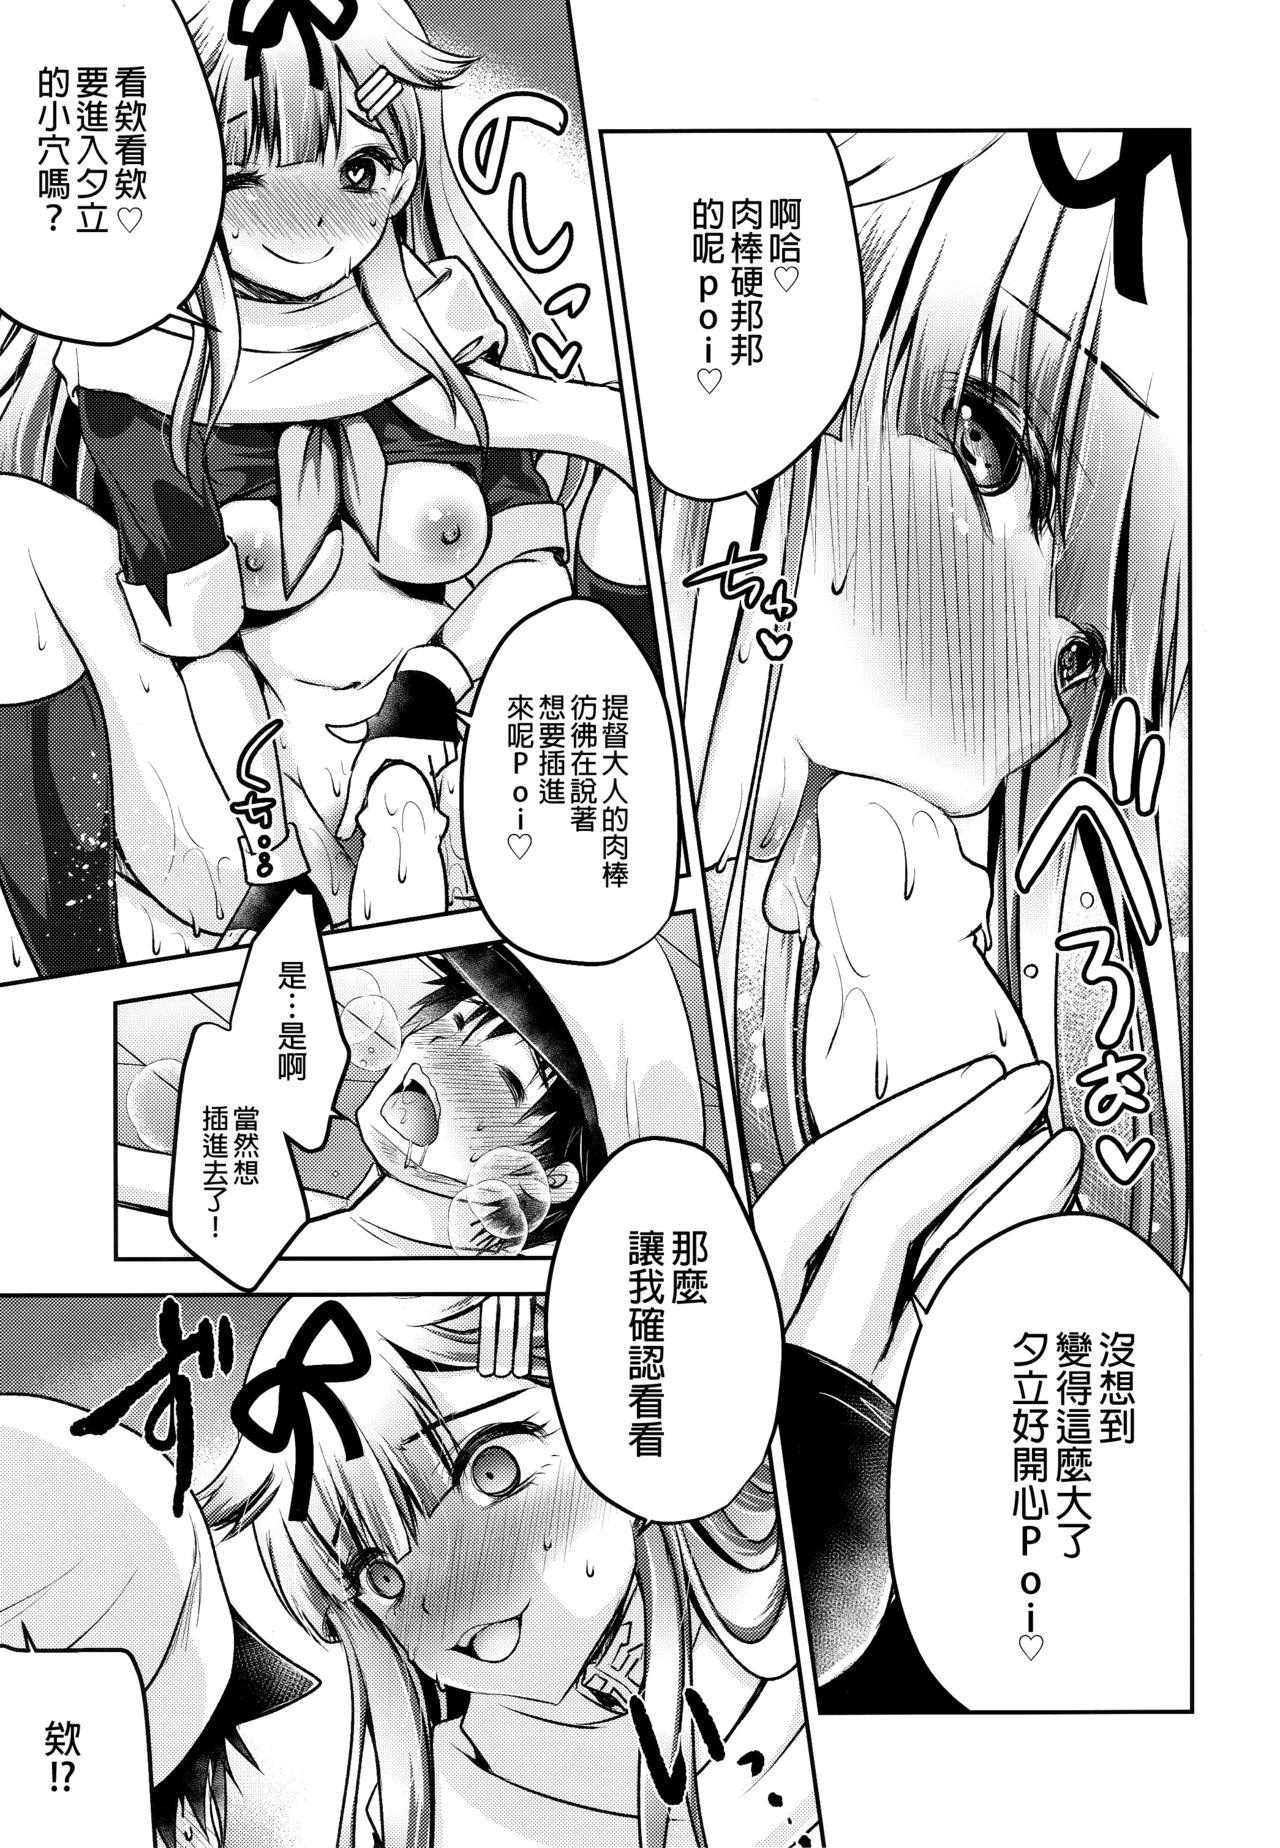 Ink Namae o kaite - Kantai collection Best Blowjobs Ever - Page 13